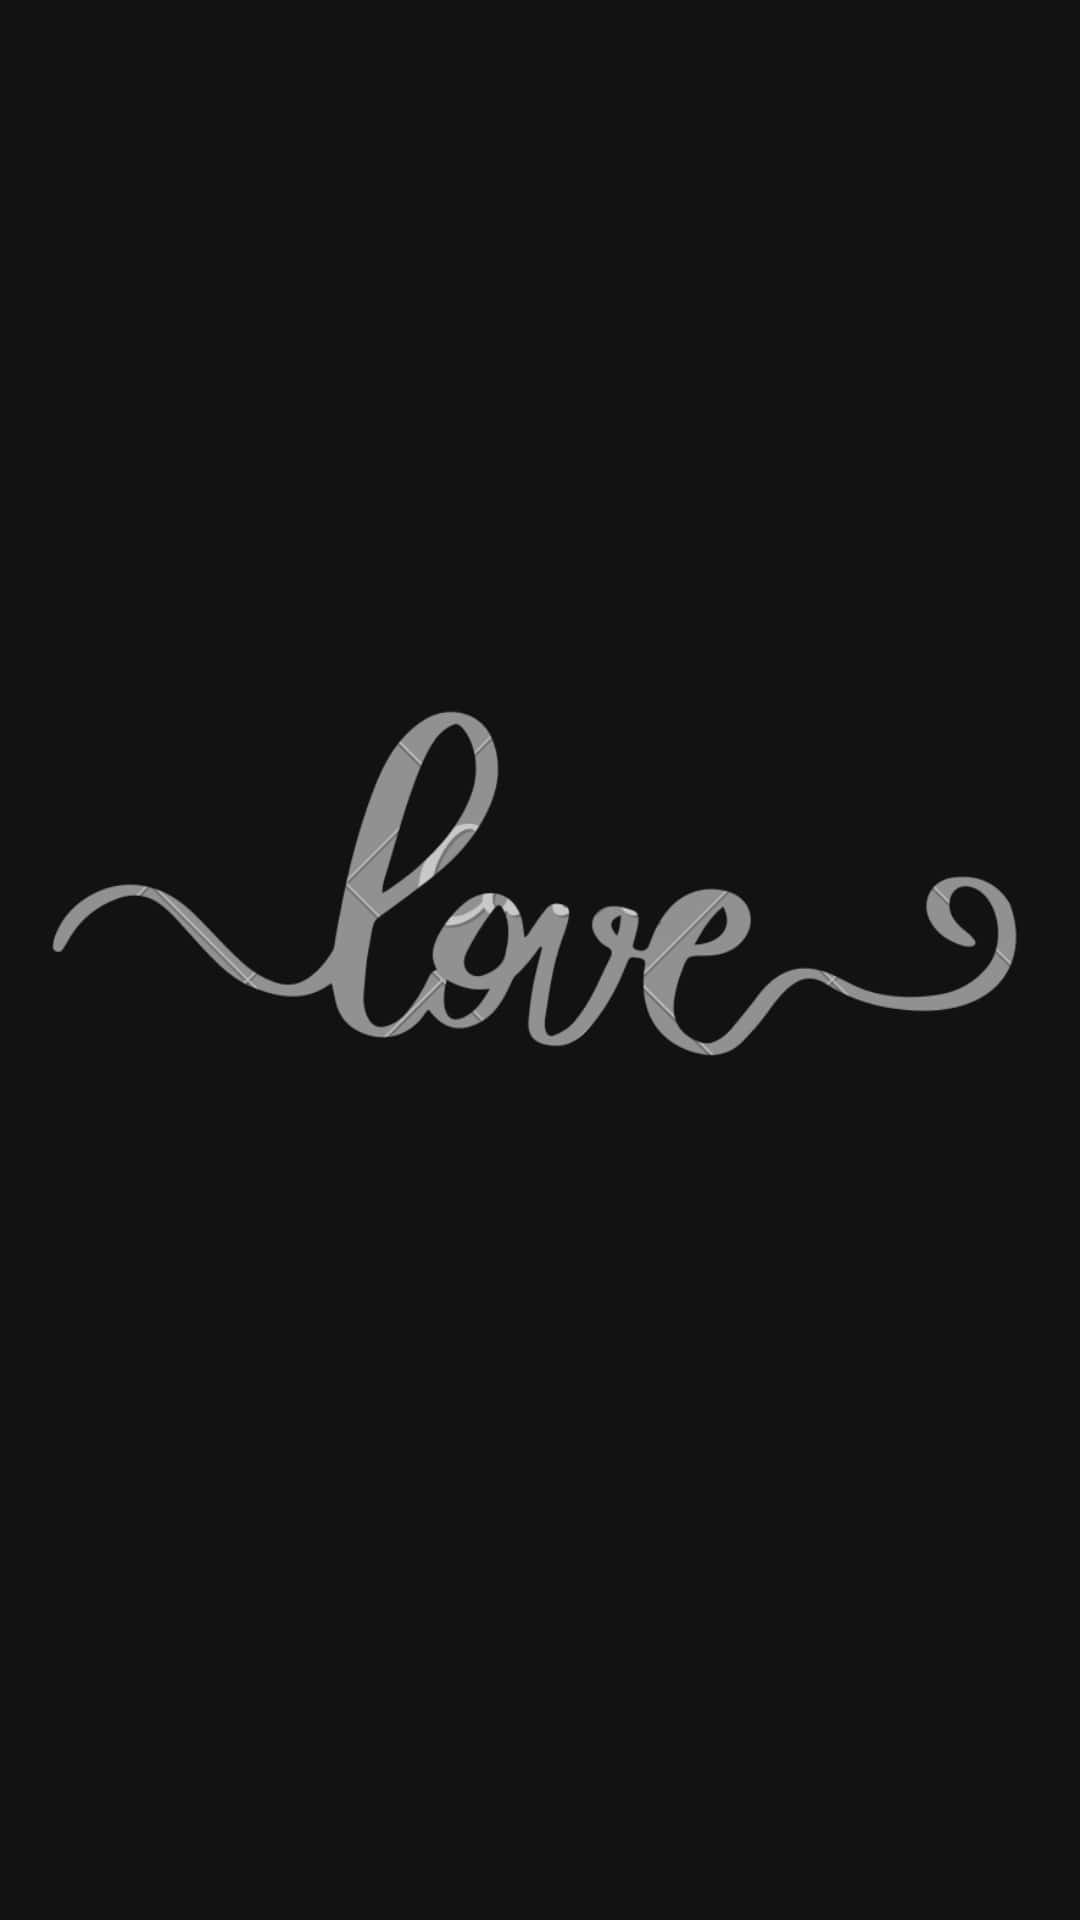 Download Love Calligraphy Aesthetic Black Background